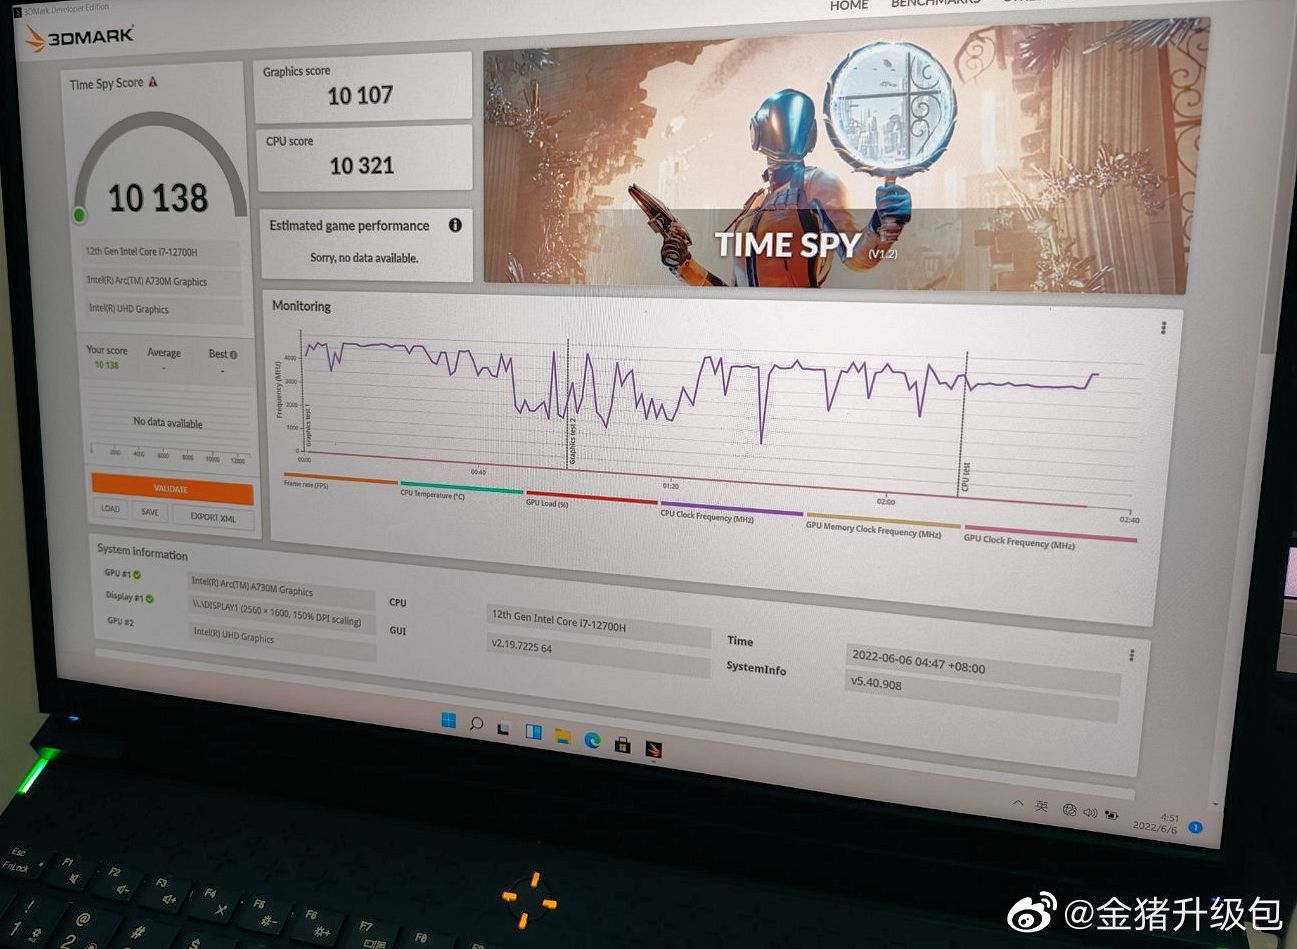 Intel shares official Arc A750 GPU benchmarks showing better than RTX 3060  performance - Neowin